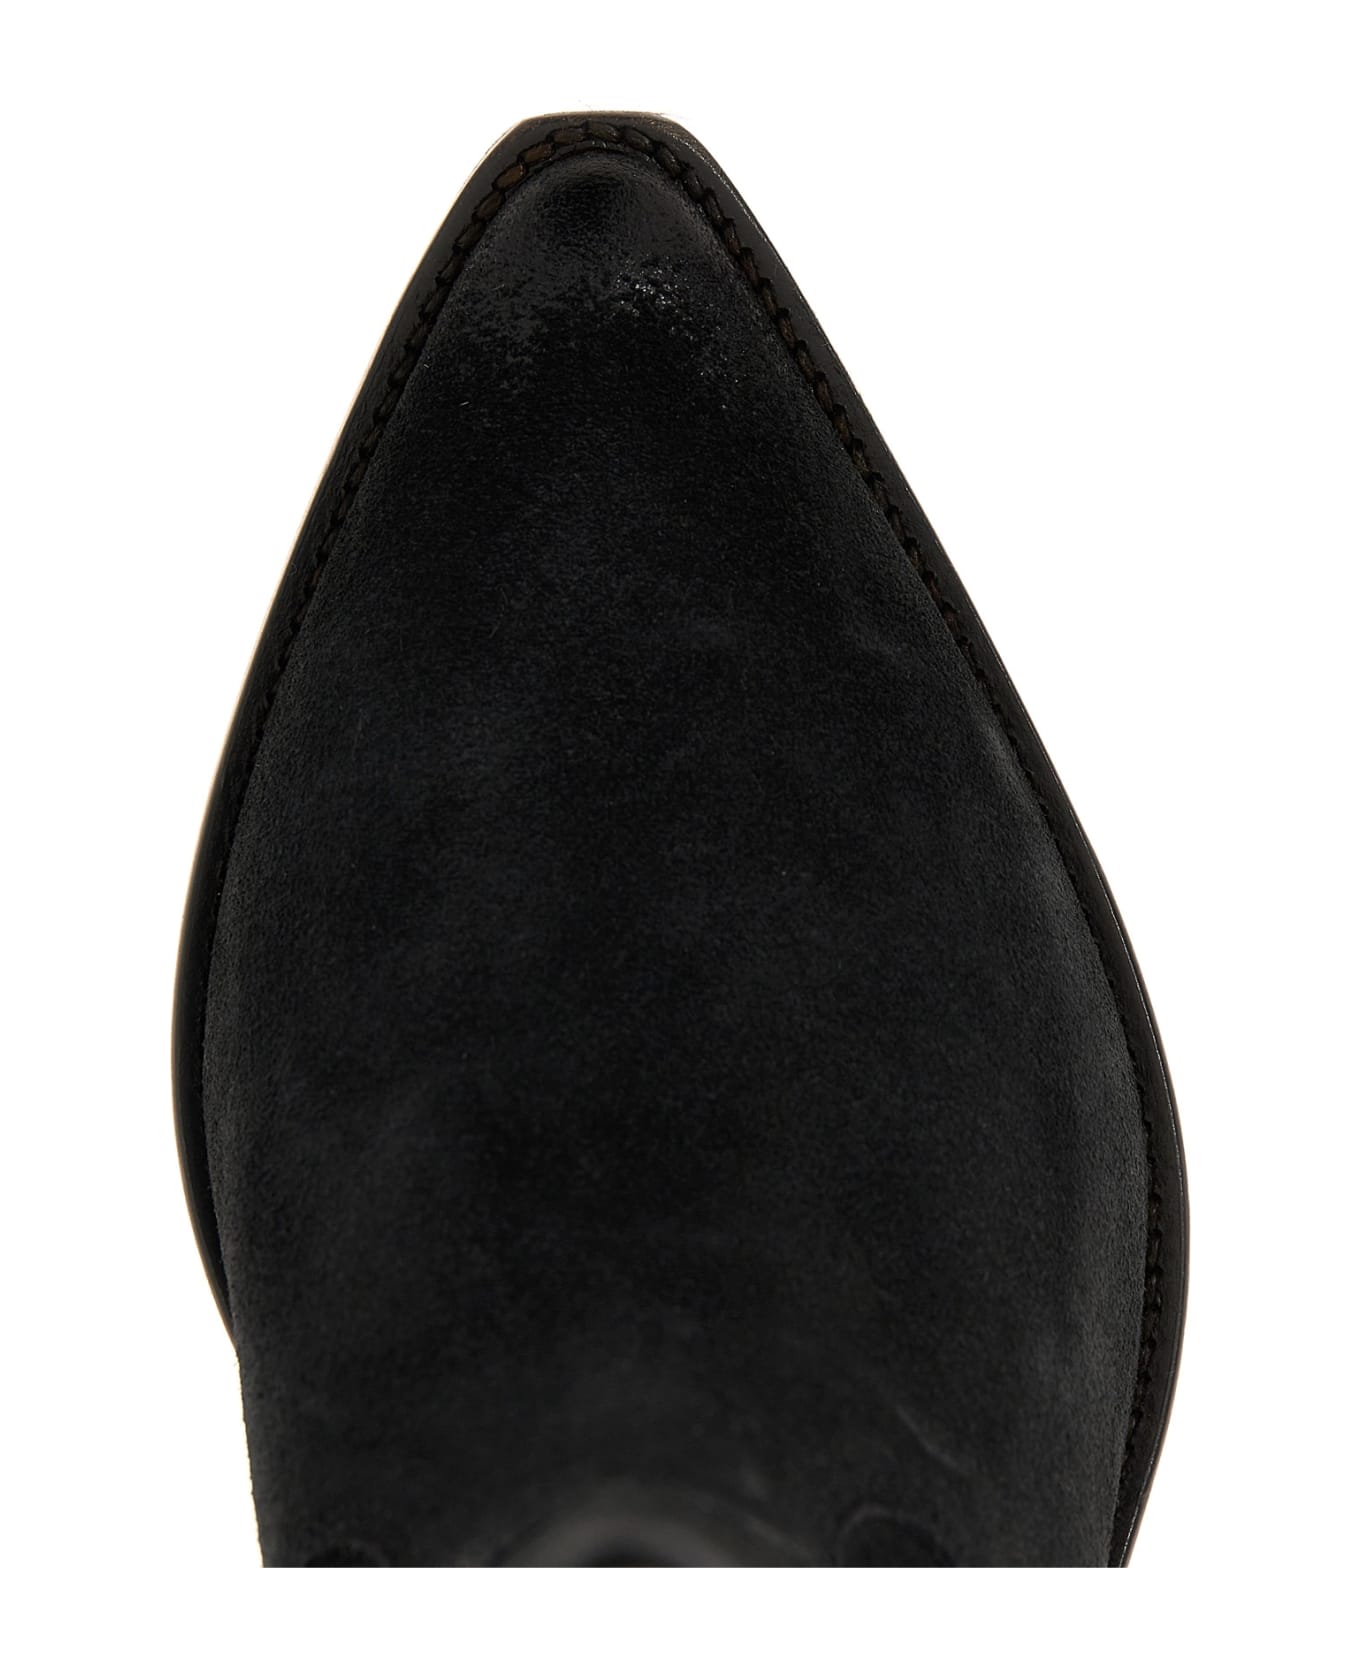 Isabel Marant Duerto Suede Cowboy Boots - FADED BLACK